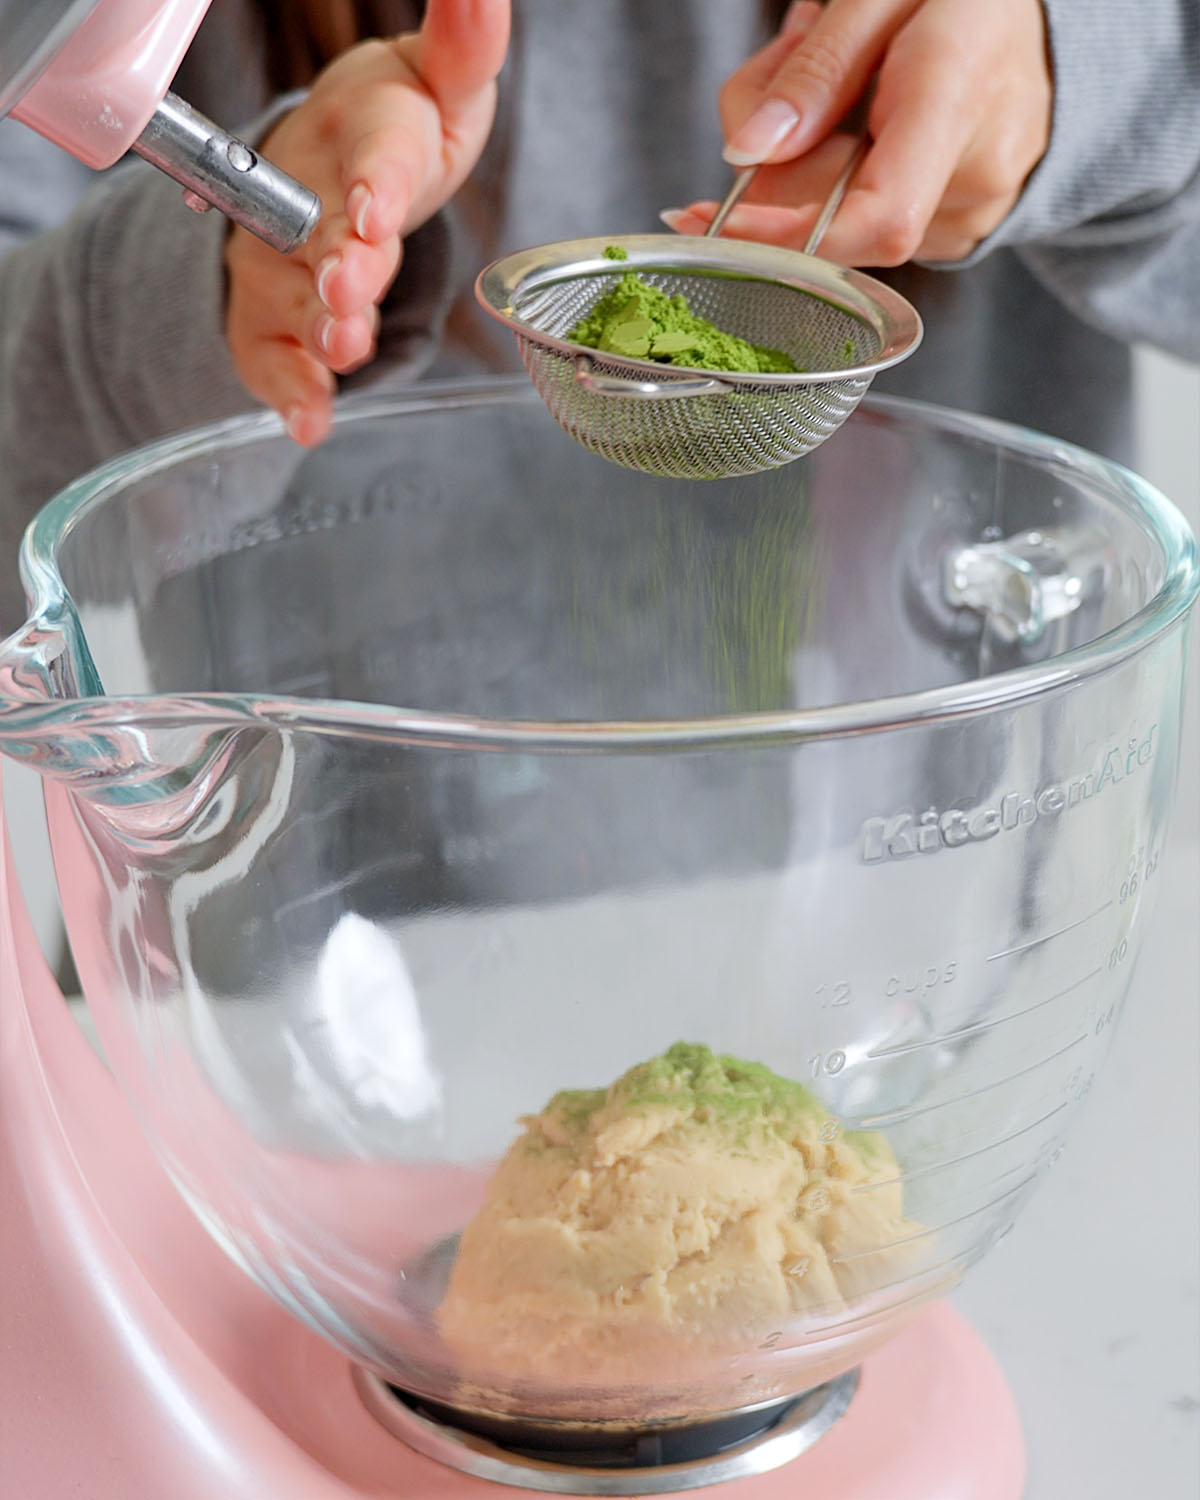 Sifting the matcha into the bowl with the dough to mix.